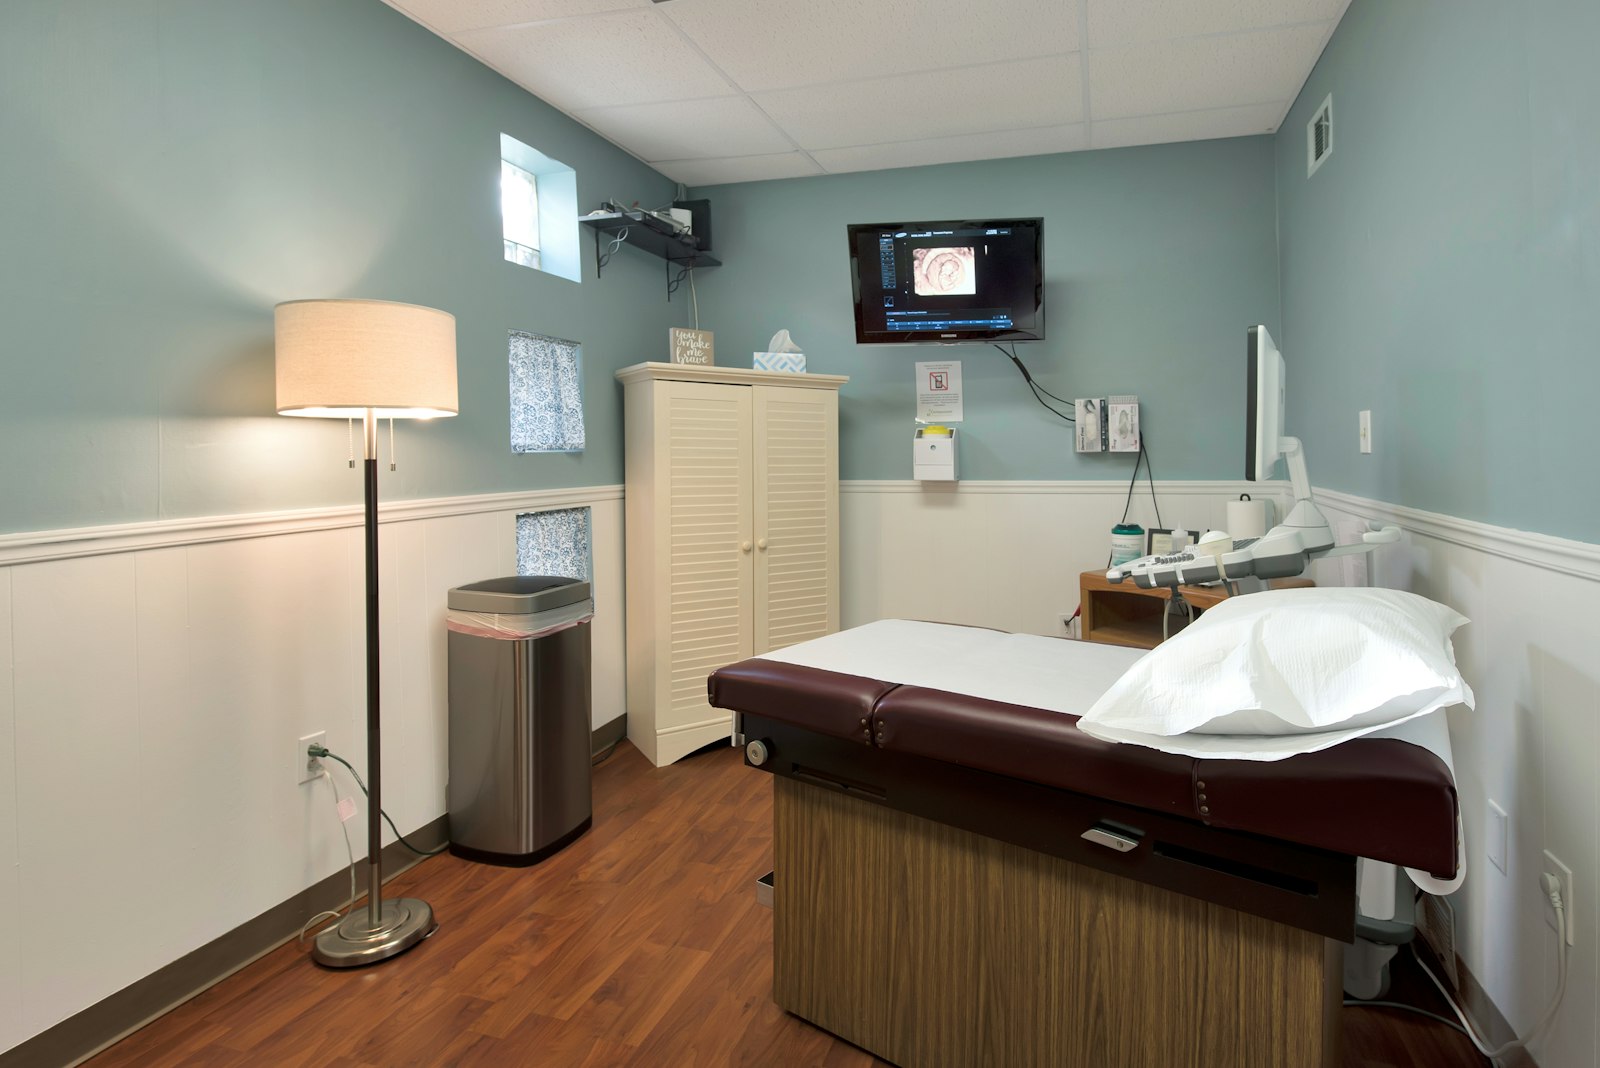 A medical exam room is pictured at Compassion Pregnancy Center in Clinton Township. While not all pregnancy centers offer medical services, some, like Compassion, can offer a full range of prenatal care under the guidance of a licensed medical professional.